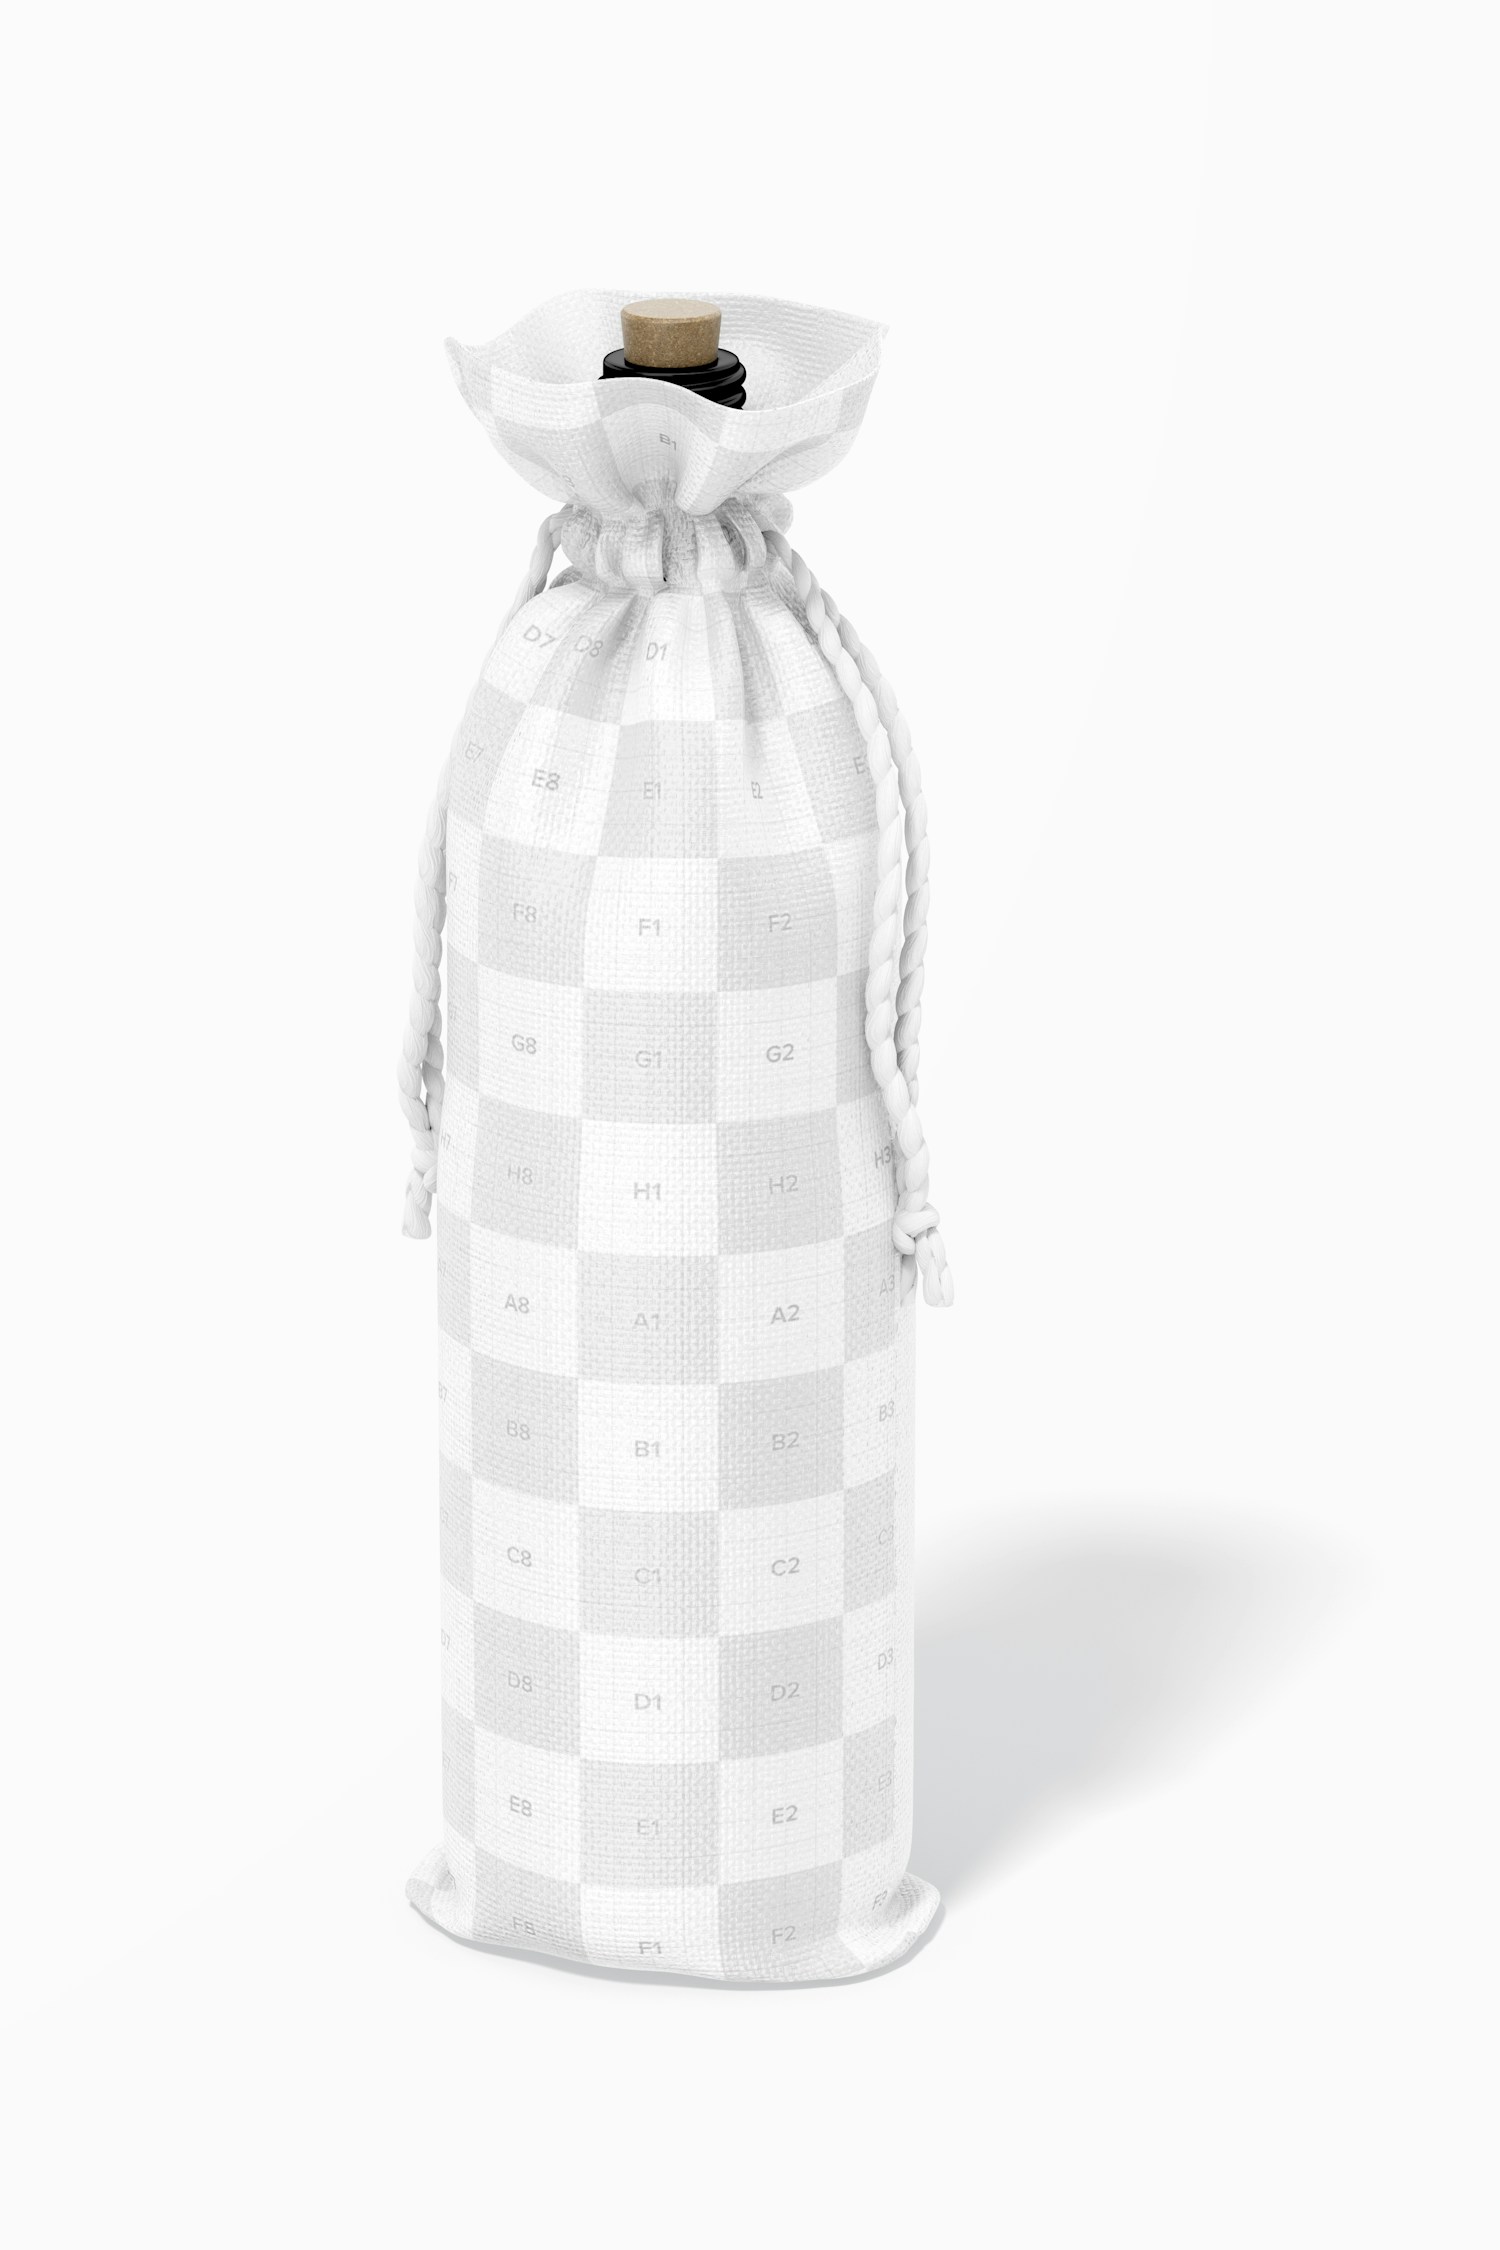 Wine Bottle Bag Mockup, Right View